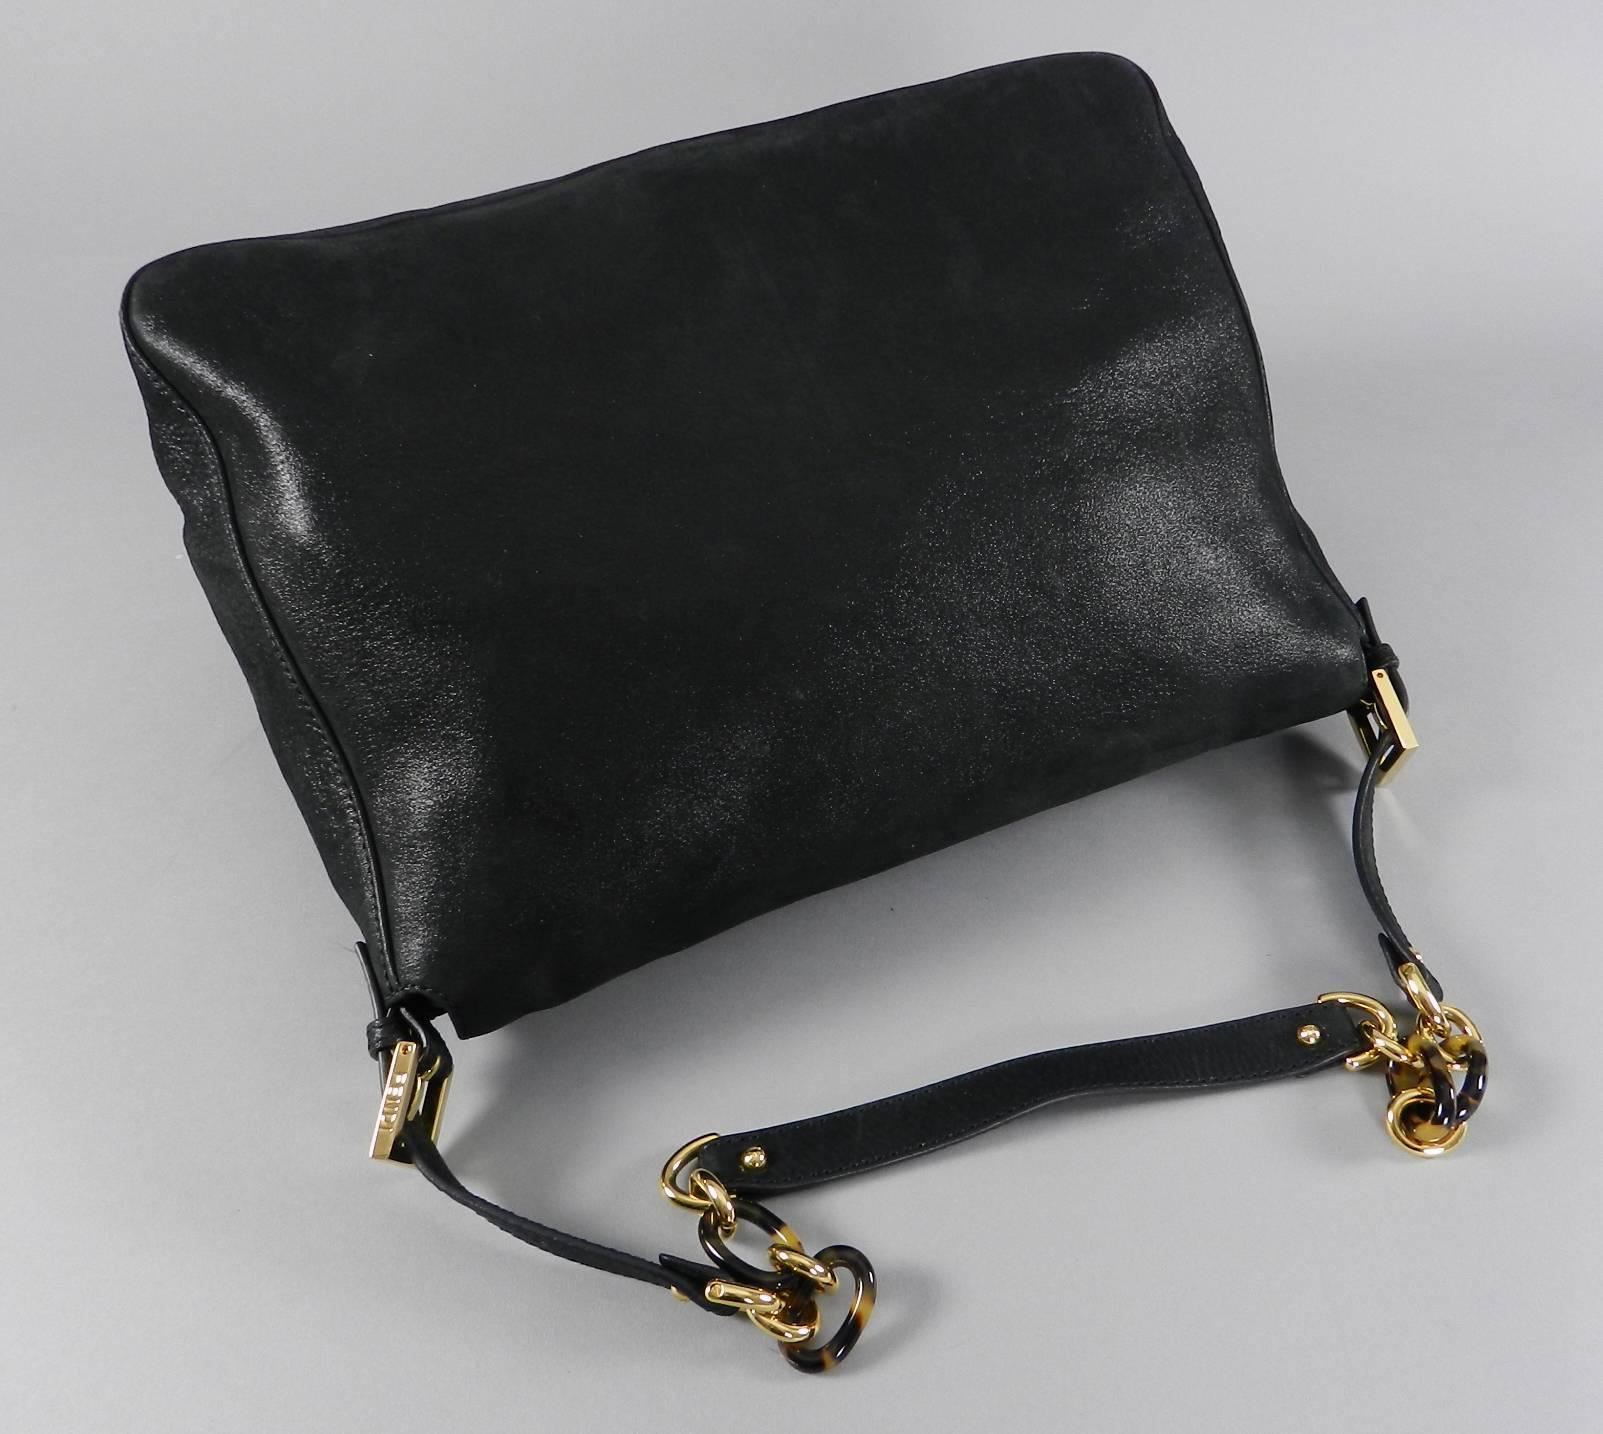 Black Fendi Suede Big Mamma Shoulder Bag with Tortoise and Resin Clasp